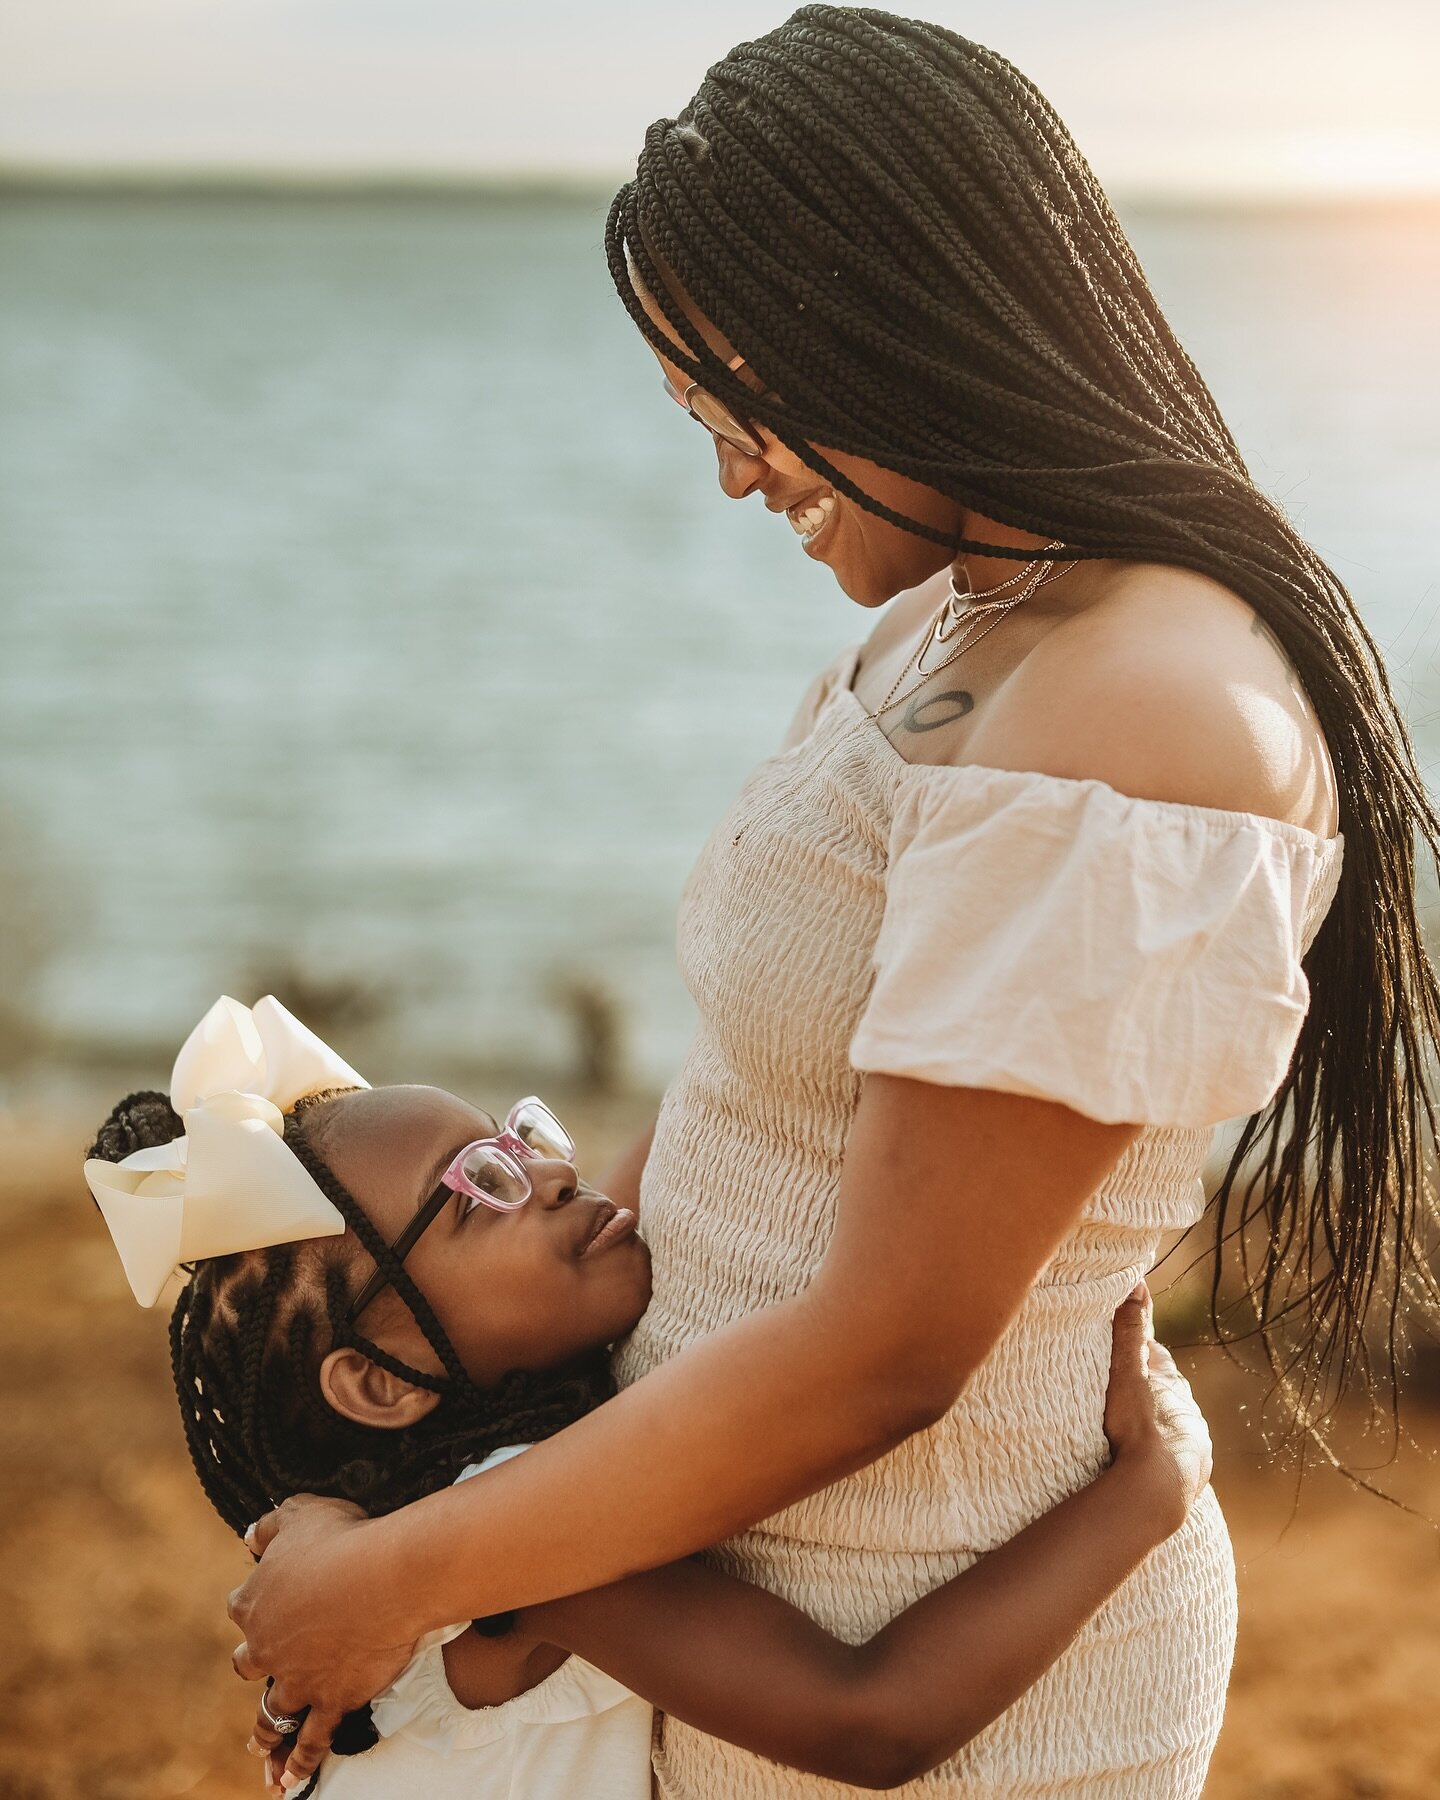 The absolute sweetest little moment with this gorgeous mama and daughter 🥰